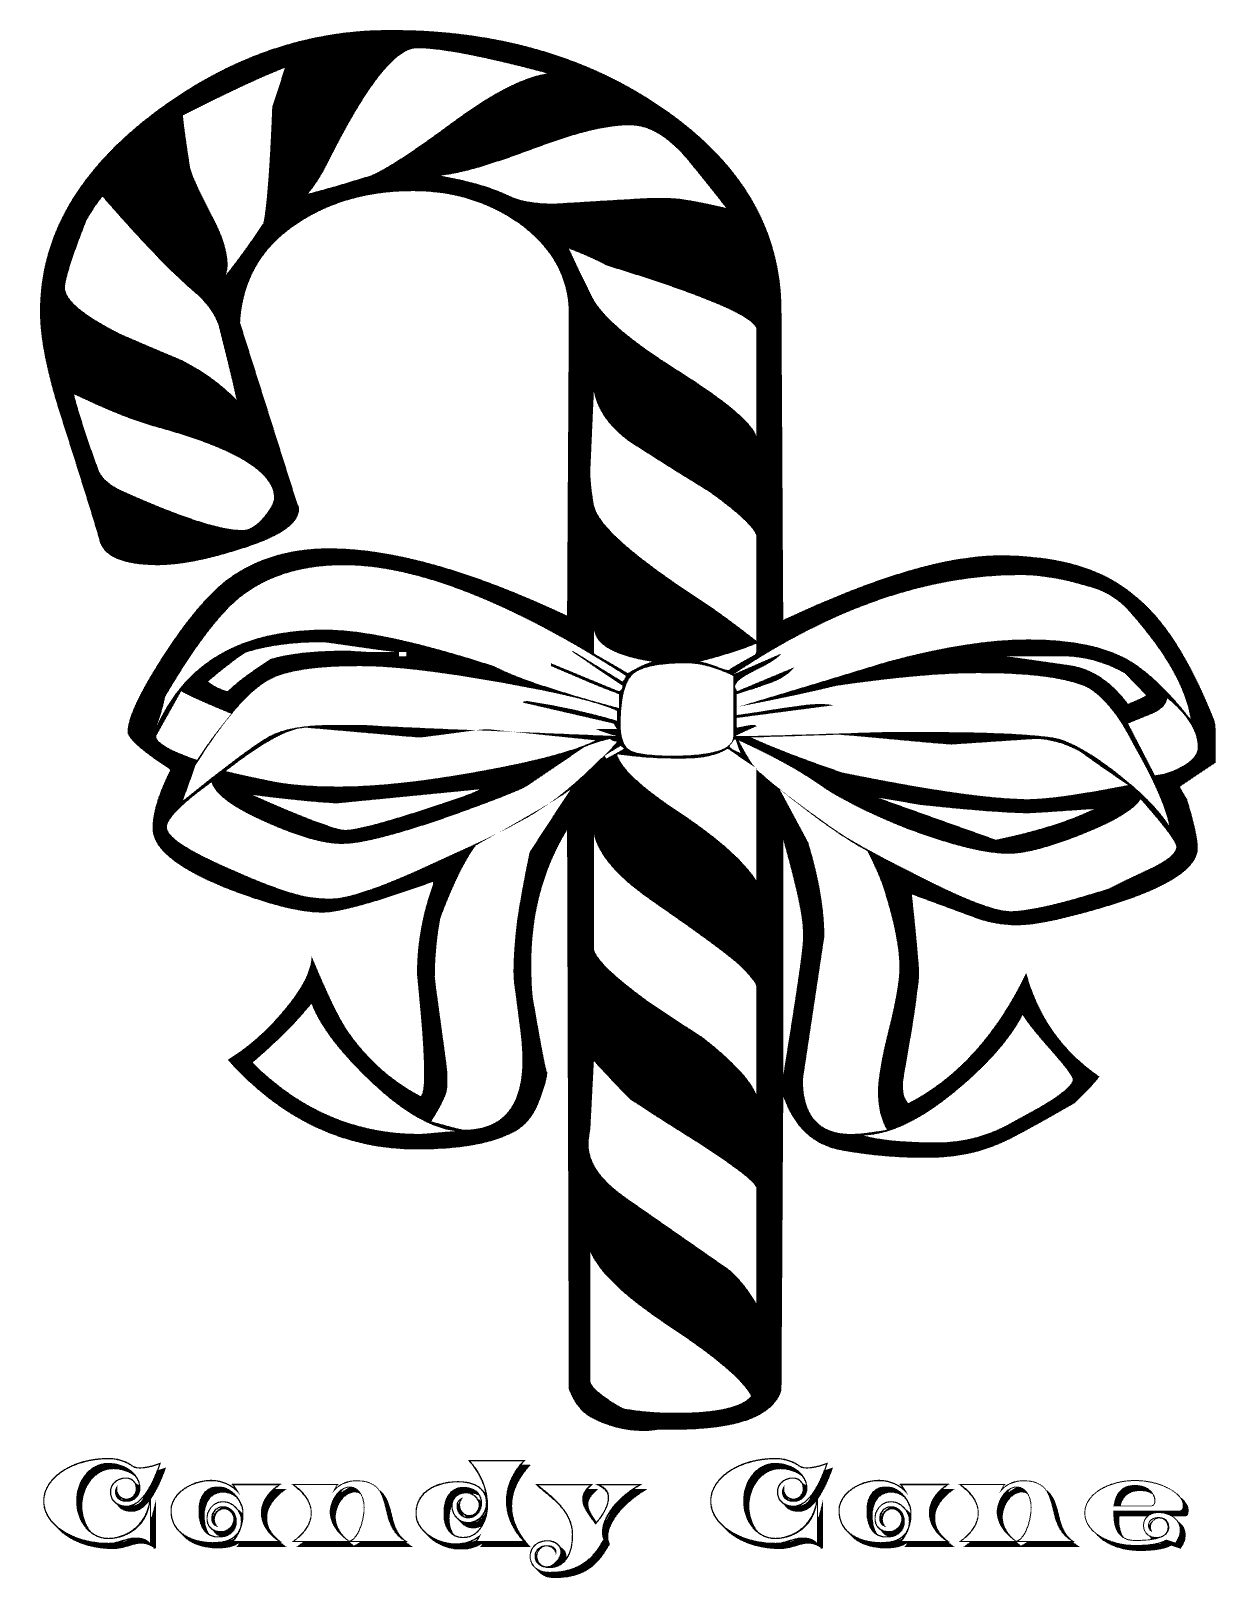 Candy Cane Coloring Pages Beautiful | Coloring pages